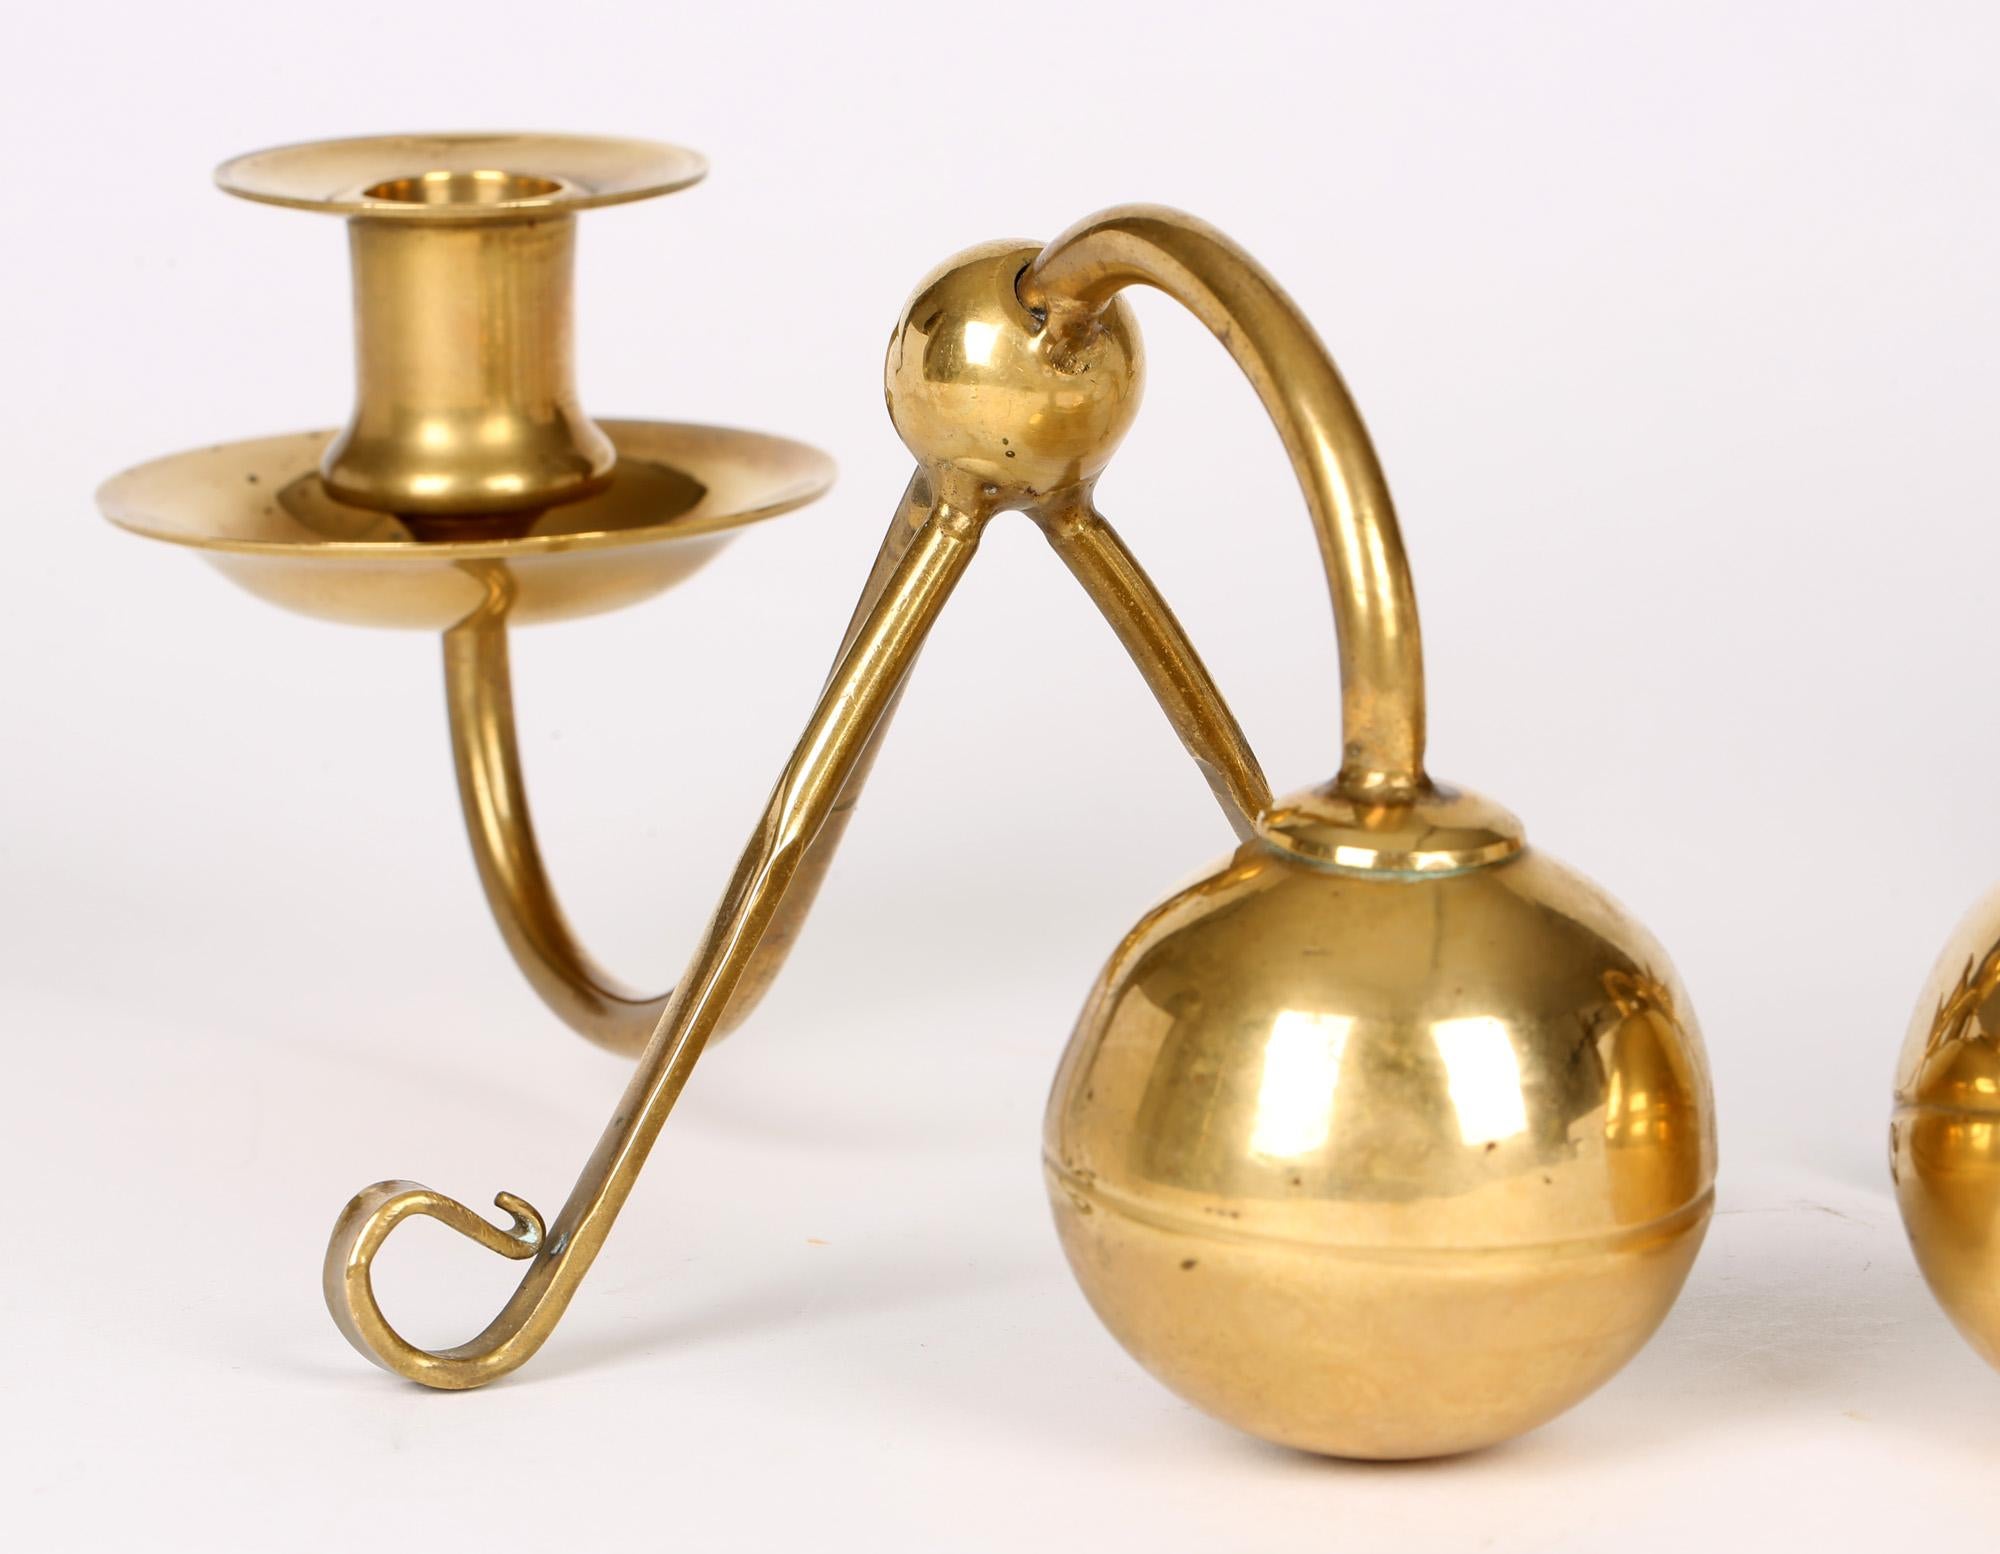 An unusual pair Arts & Crafts counter balanced brass candlesticks attributed to Benham & Froud and believed to have been made for use on an upright or grand piano dating from around 1890. The candlesticks are very reminiscent of a design by